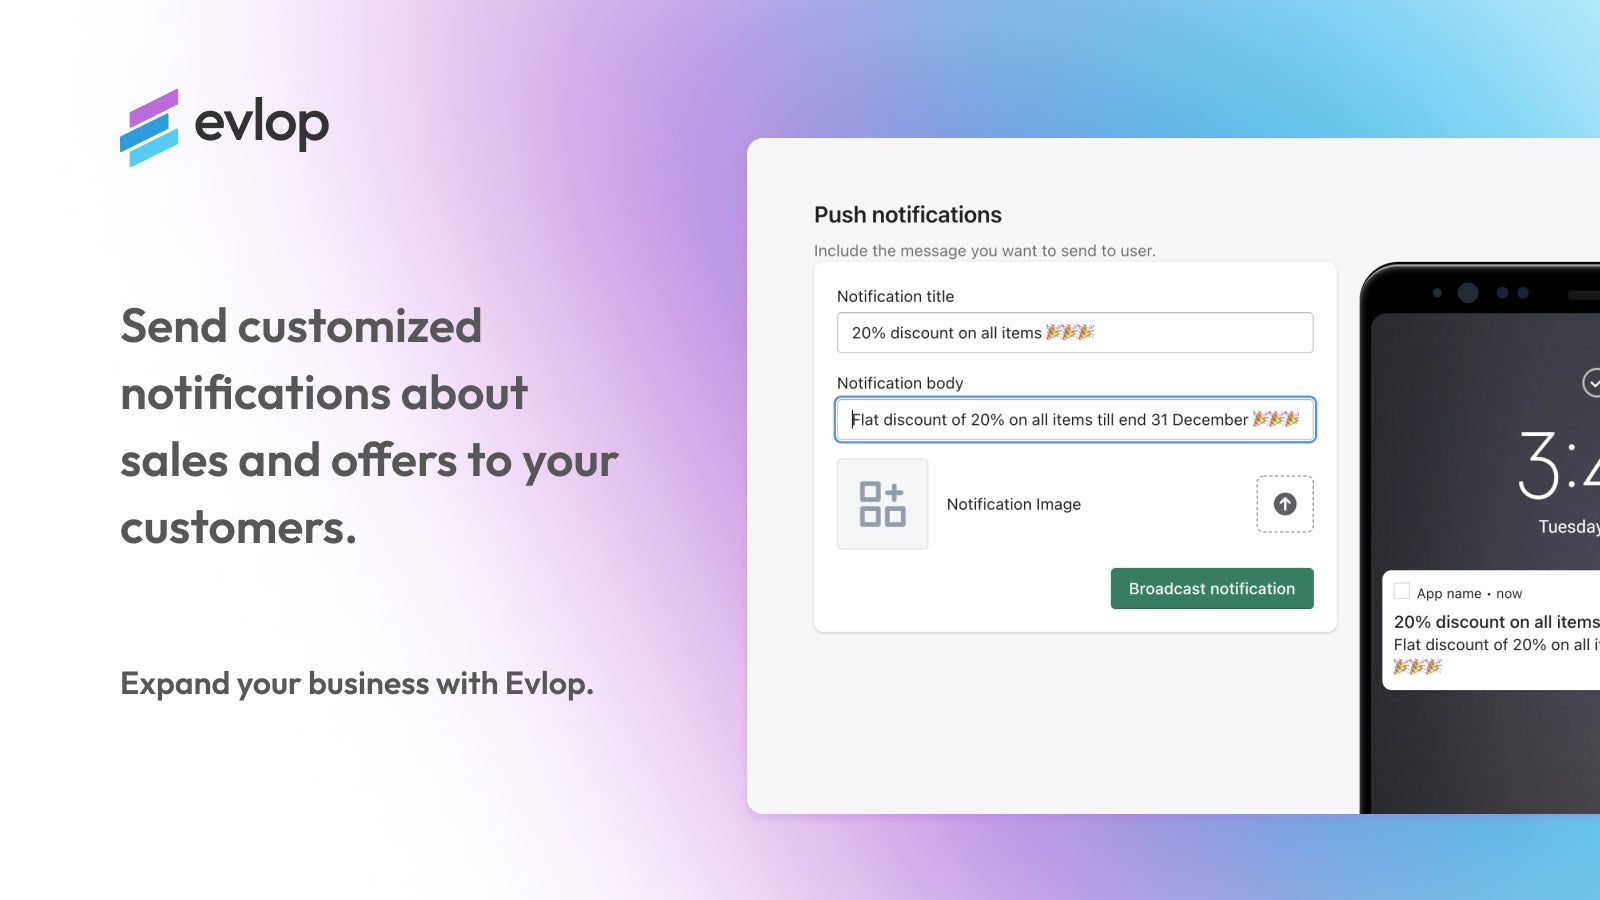 Send customized notifications about sales and offers